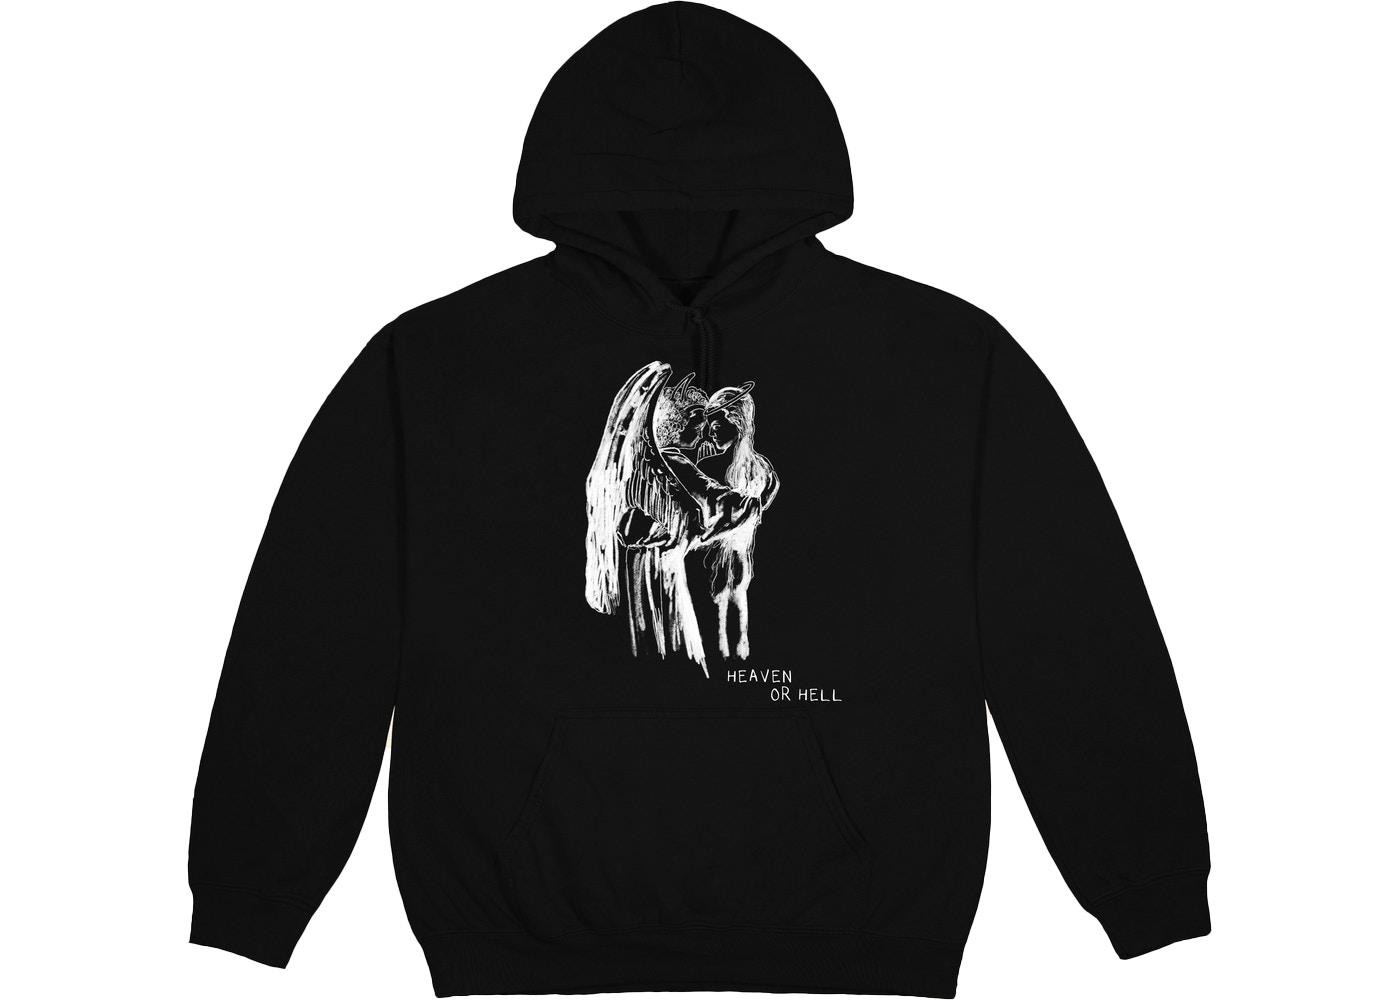 Heaven or Hell Hoodie Black by DON TOLIVER